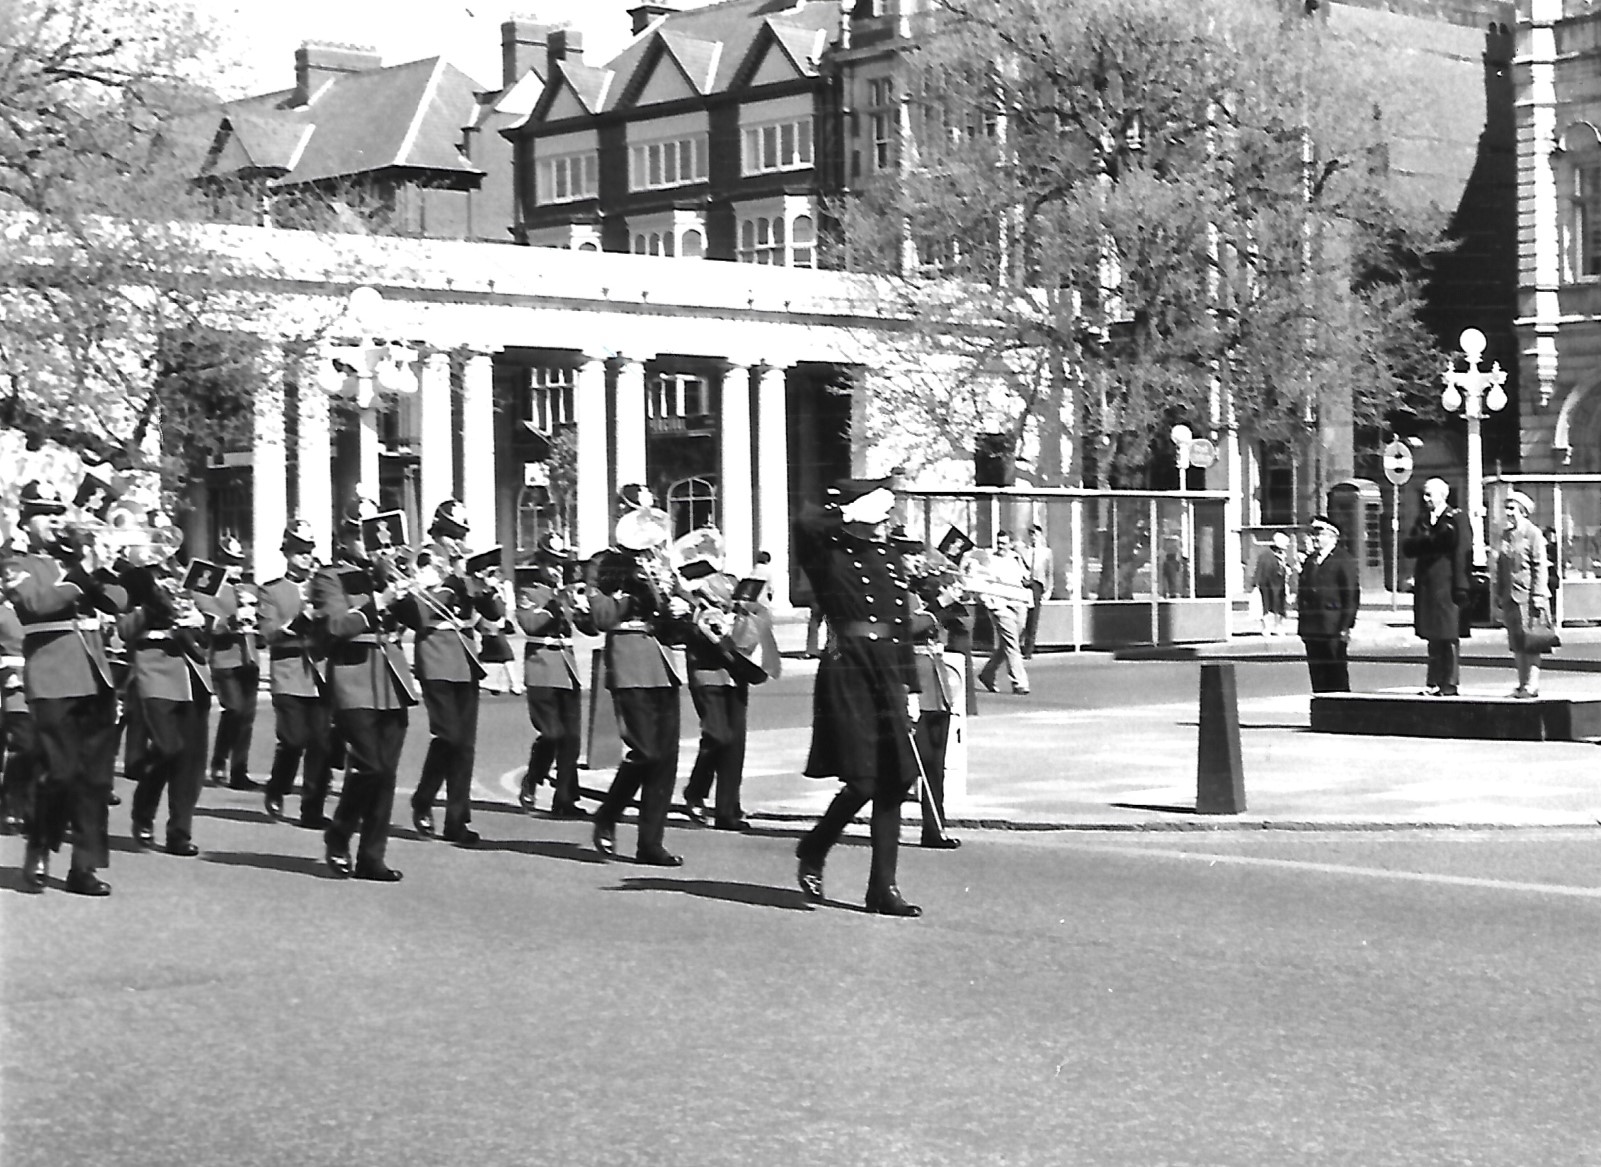 A marching band makes its way along Lord Street in May 1982 as the Mayor of Sefton takes the salute on a platform next to The Monument